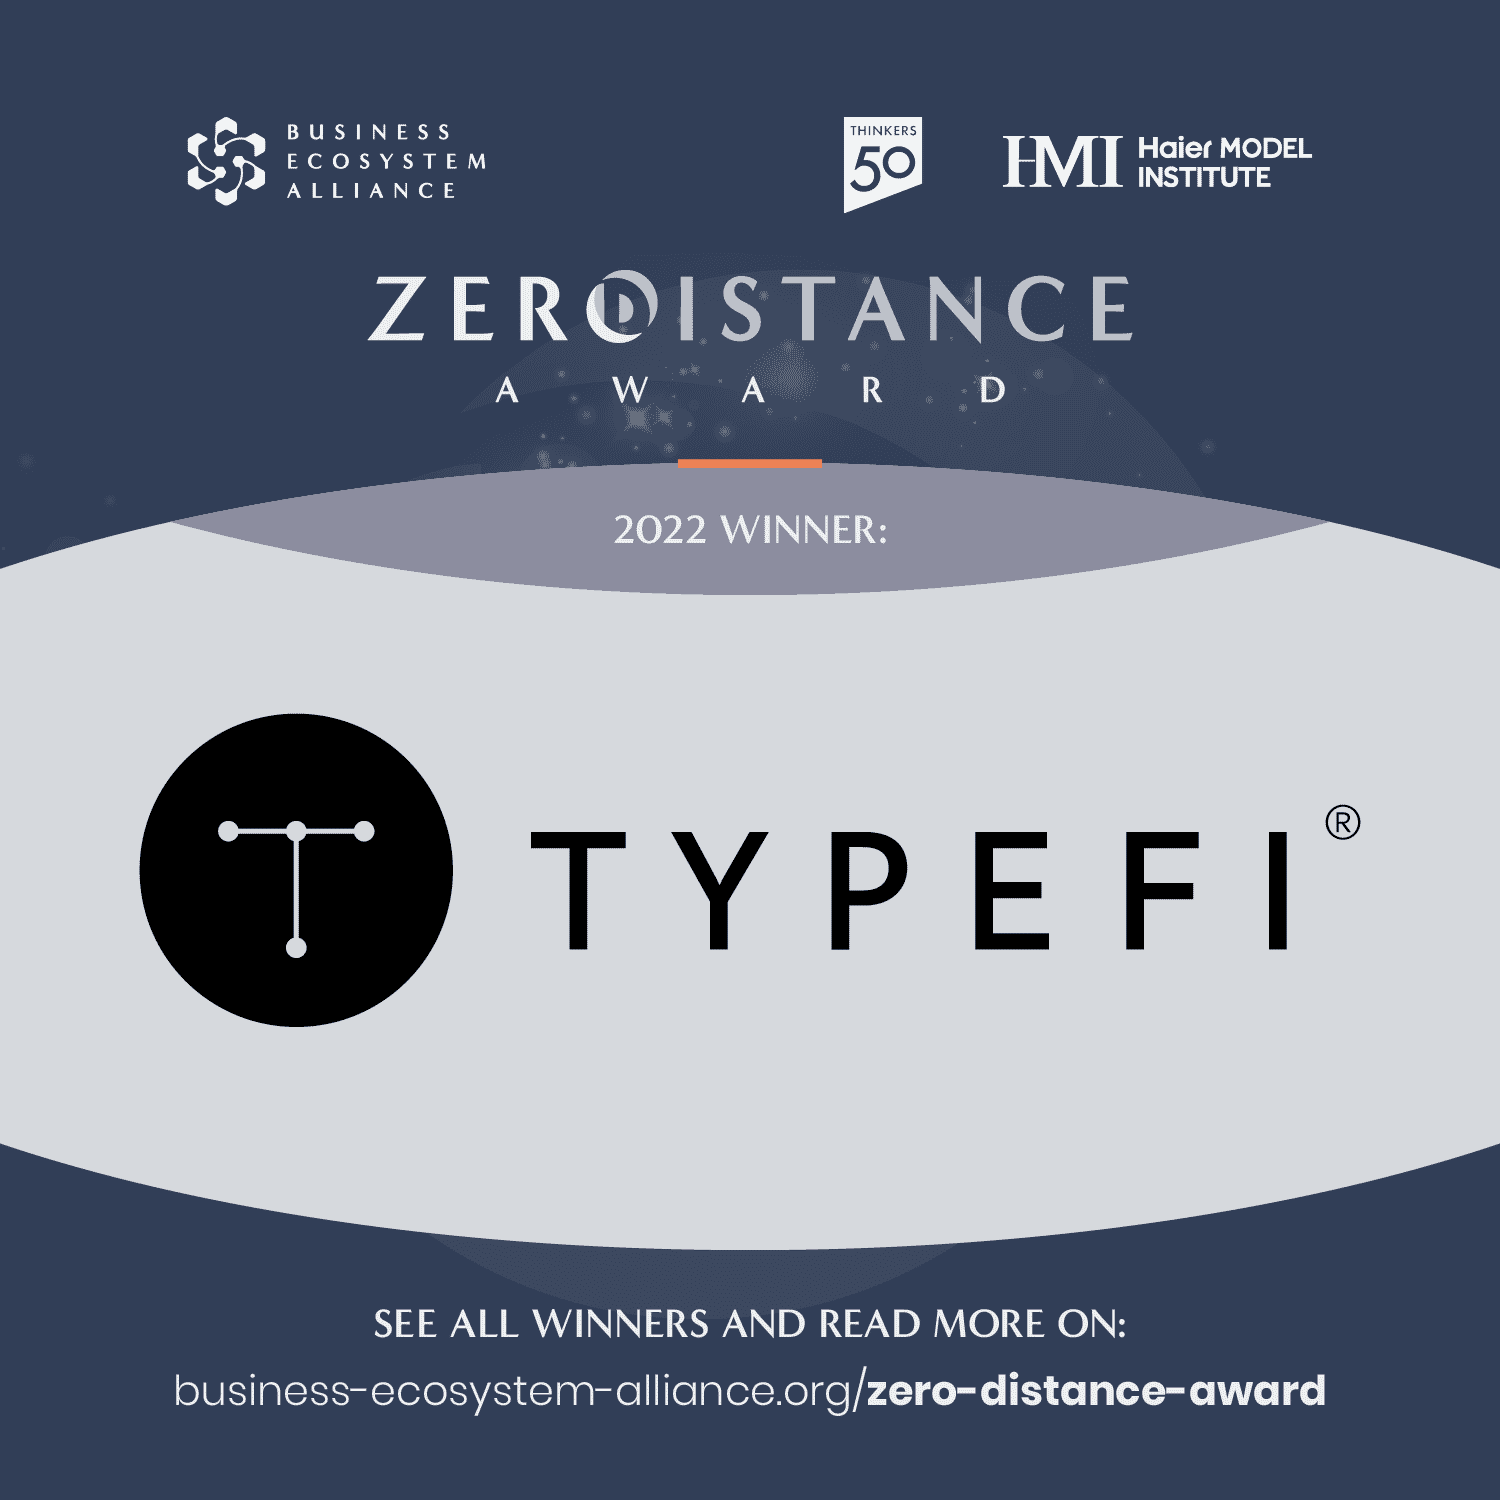 Promotional image from Business Ecosystem Alliance announcing that Typefi is an individual winner of a Zero Distance Award 2022.